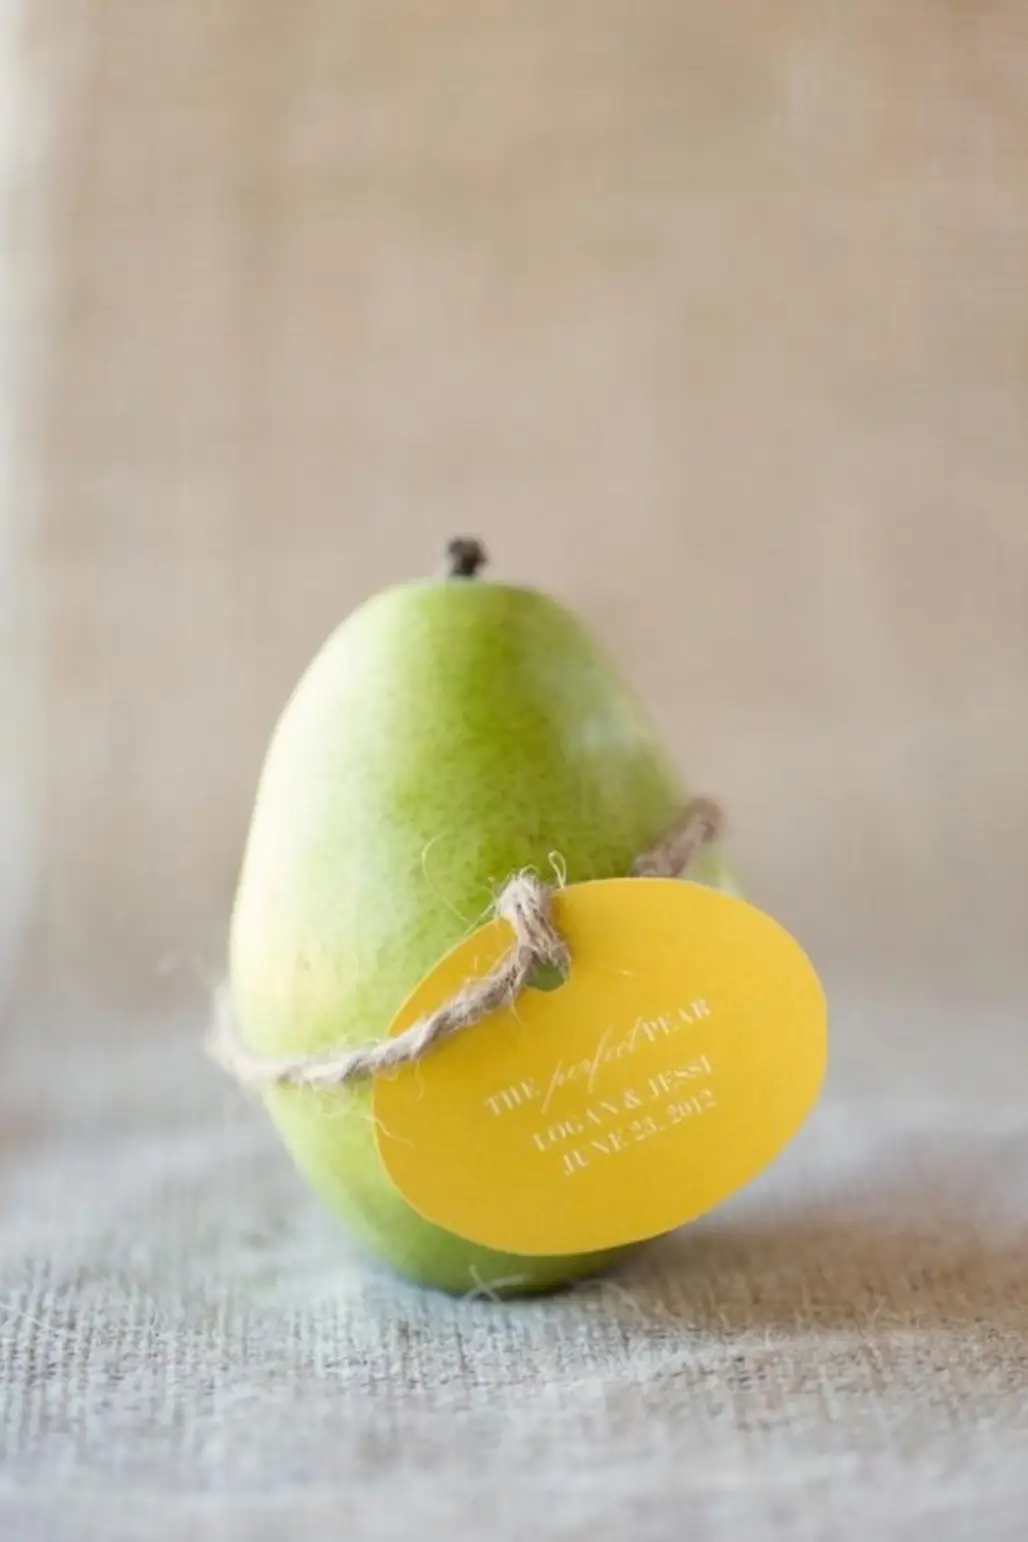 You Can’t Go Wrong with Any Variety of Pear